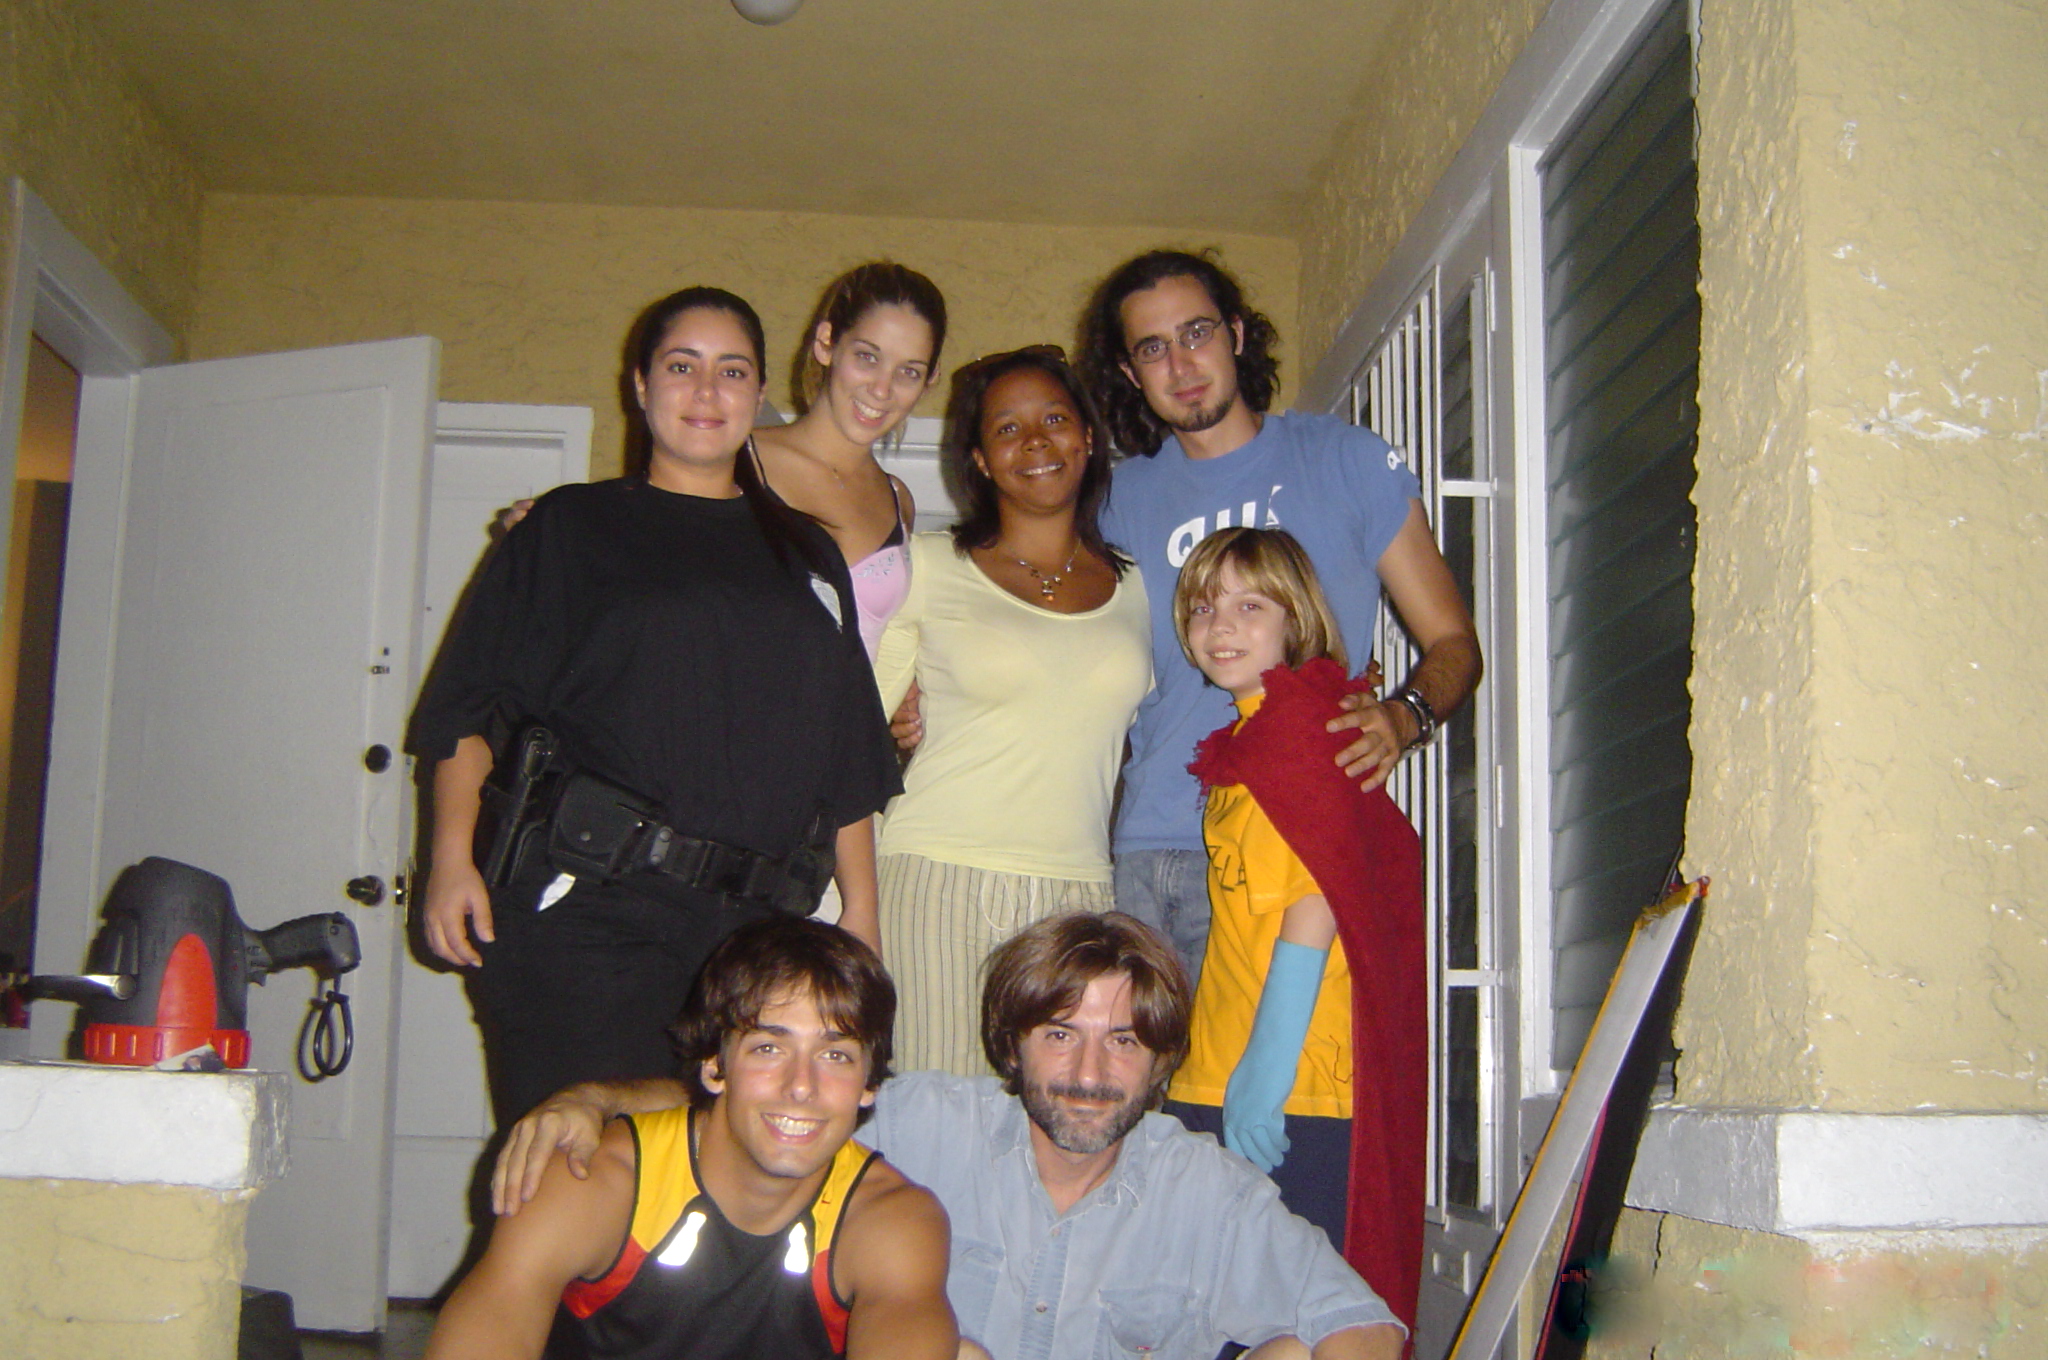 Some of the Cast and Crew on the set of 